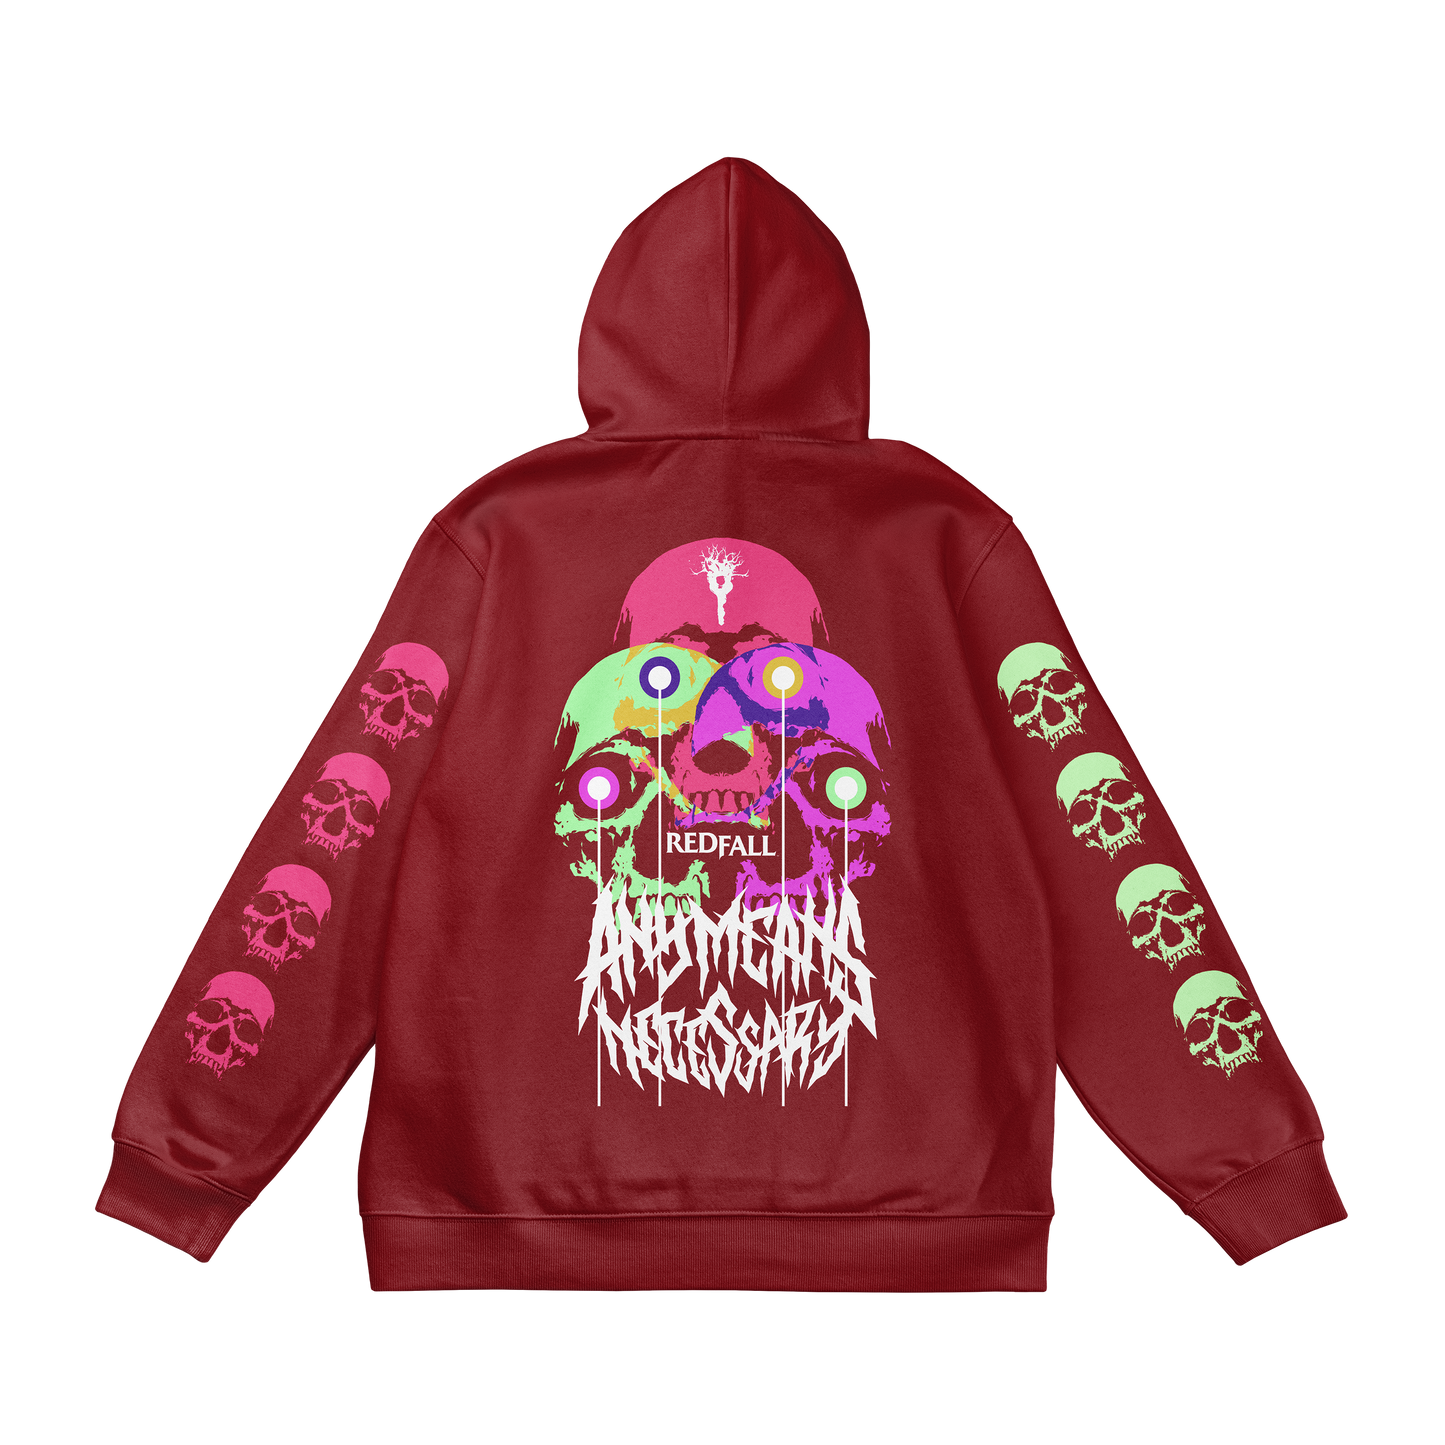 
                  
                    any means necessary shawn coss red fall game xbox microsoft bethesda studios 3 skulls pullover hoodie burgundy back
                  
                